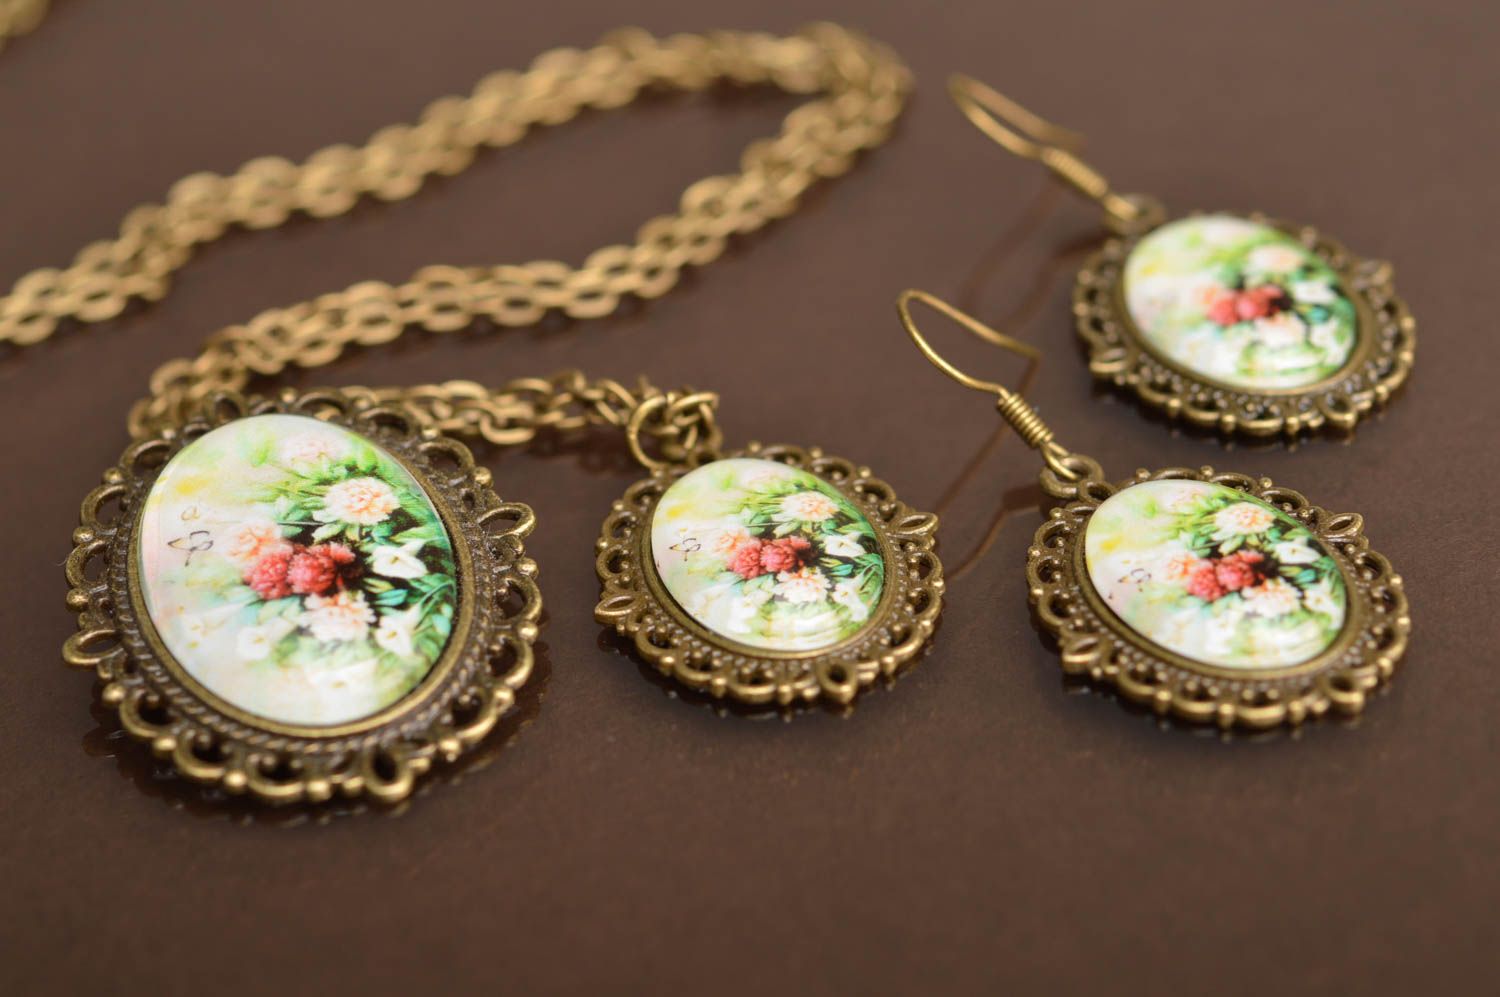 Set of 3 handmade stylish jewelry accessories pendant brooch and earrings photo 2